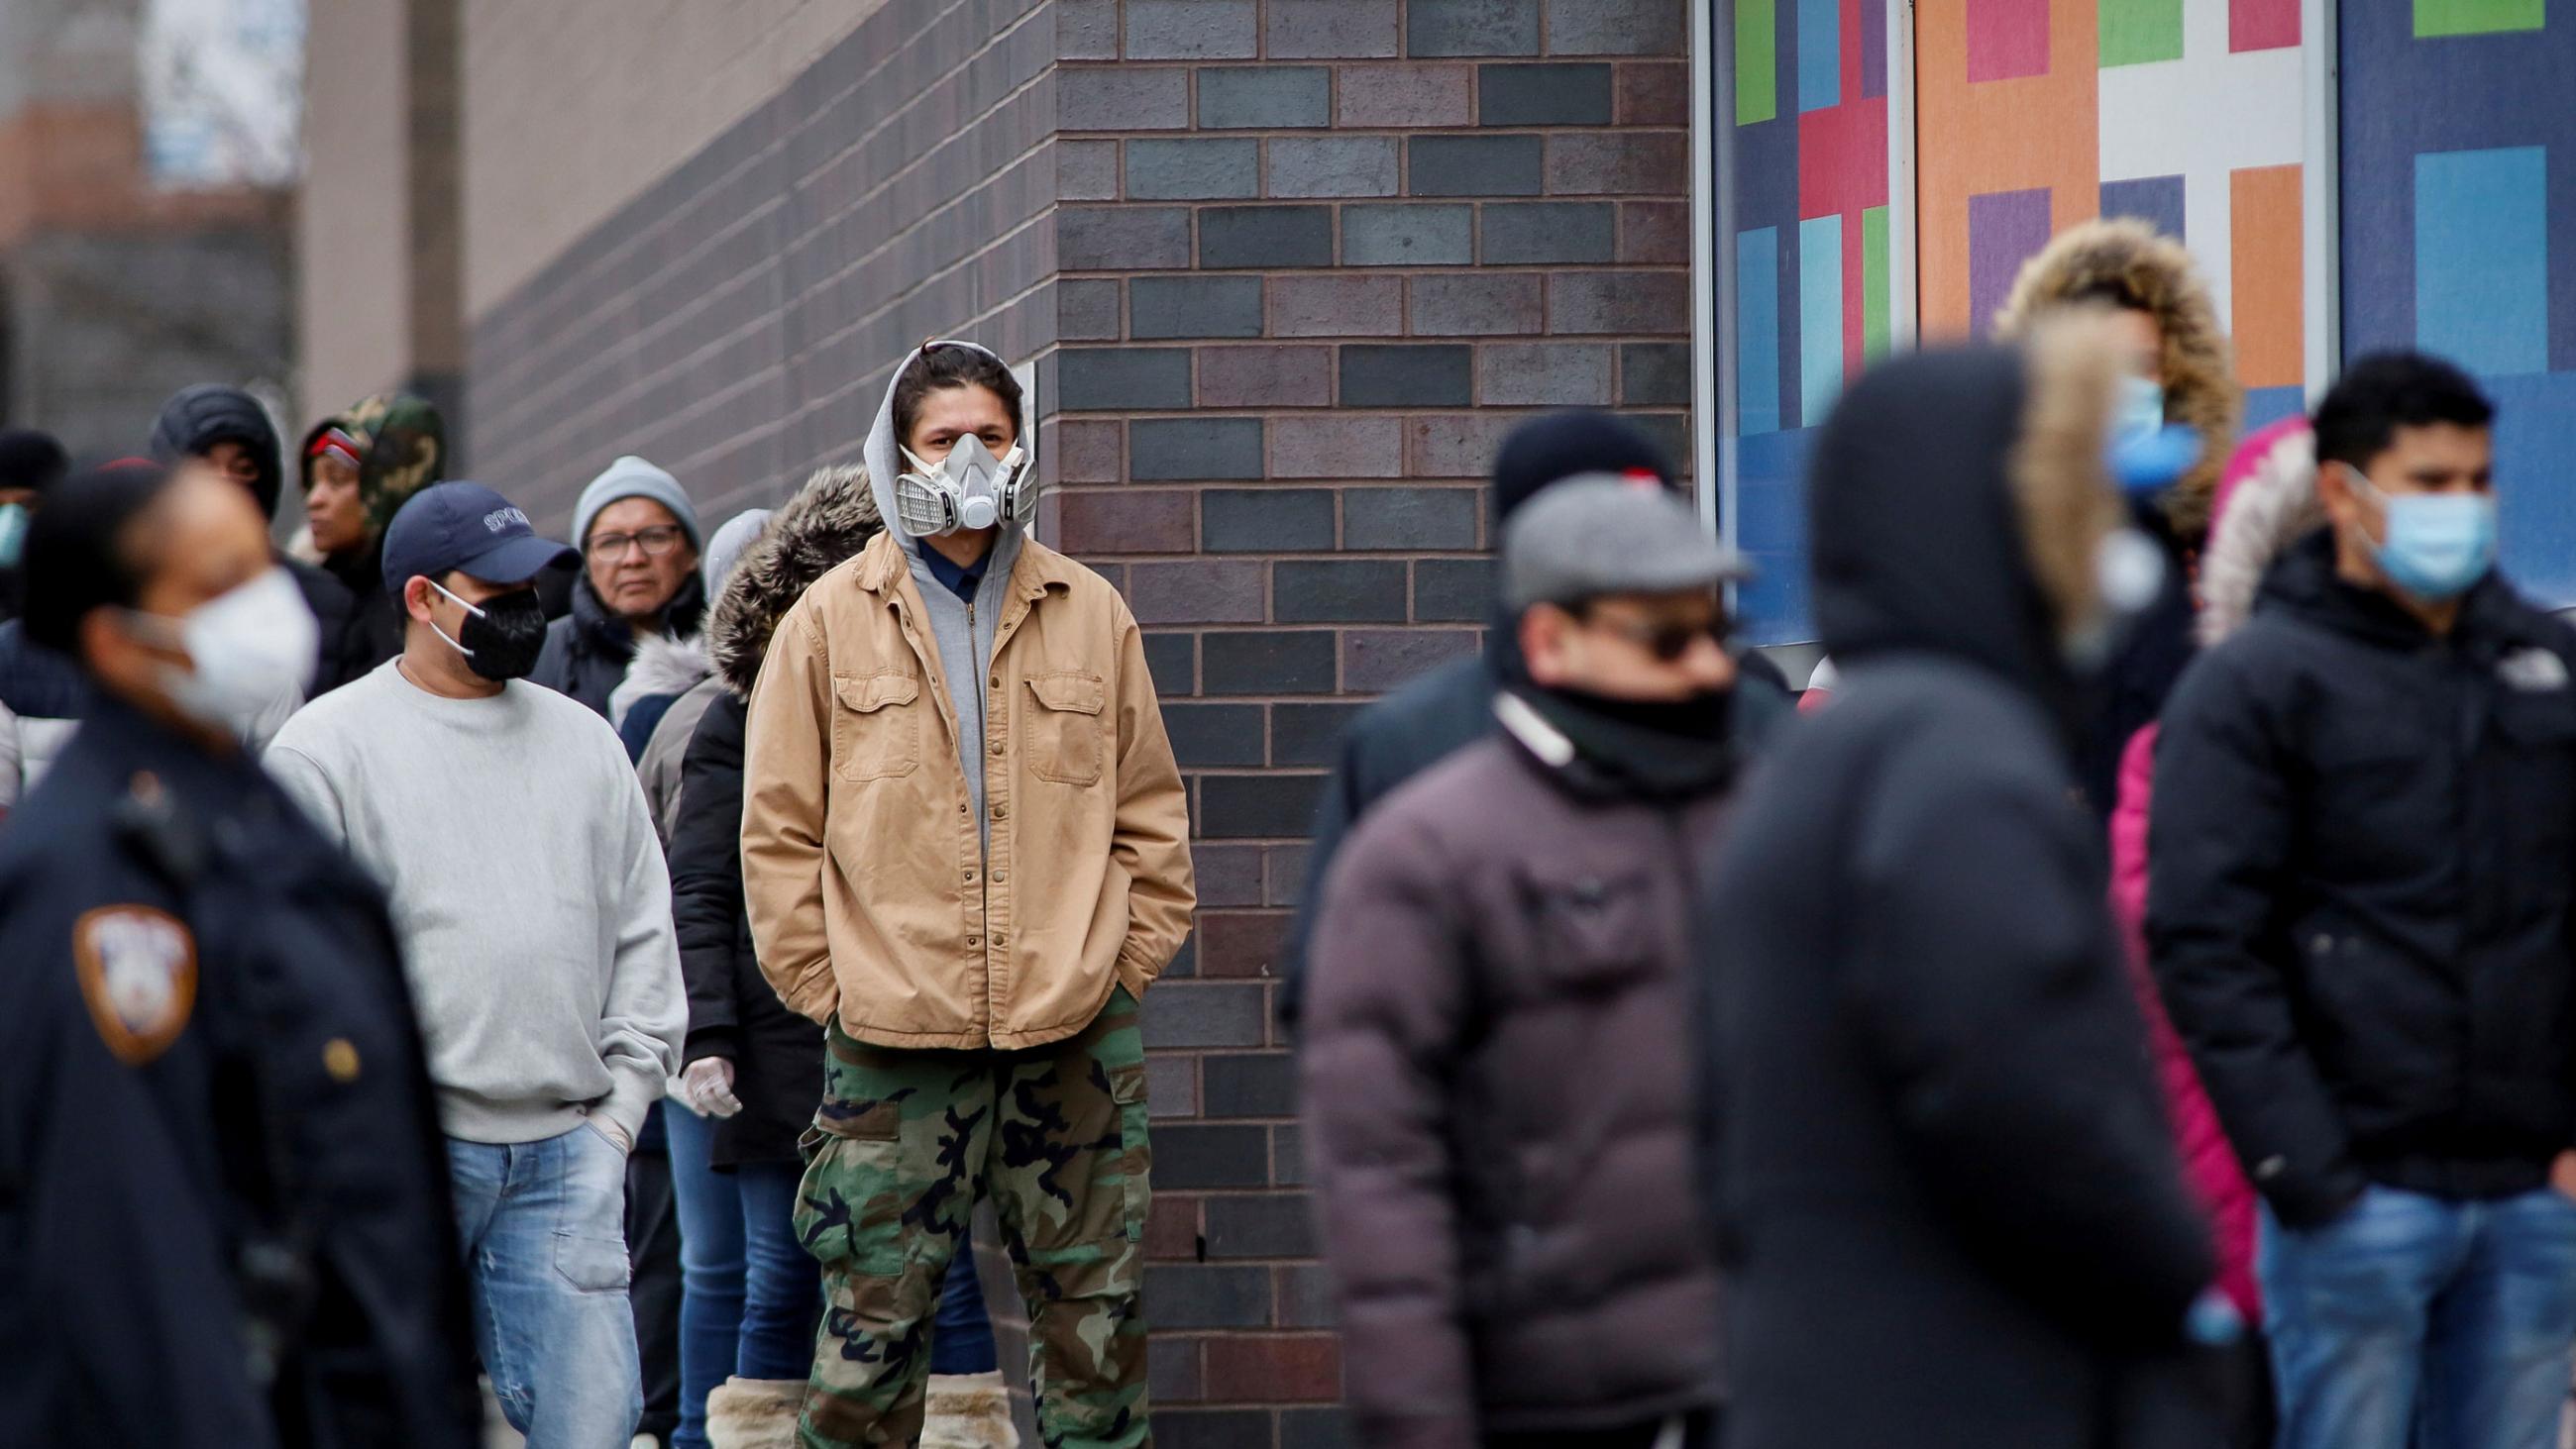 The photo shows several people in front of the hospital, several of them wearing dust masks. 